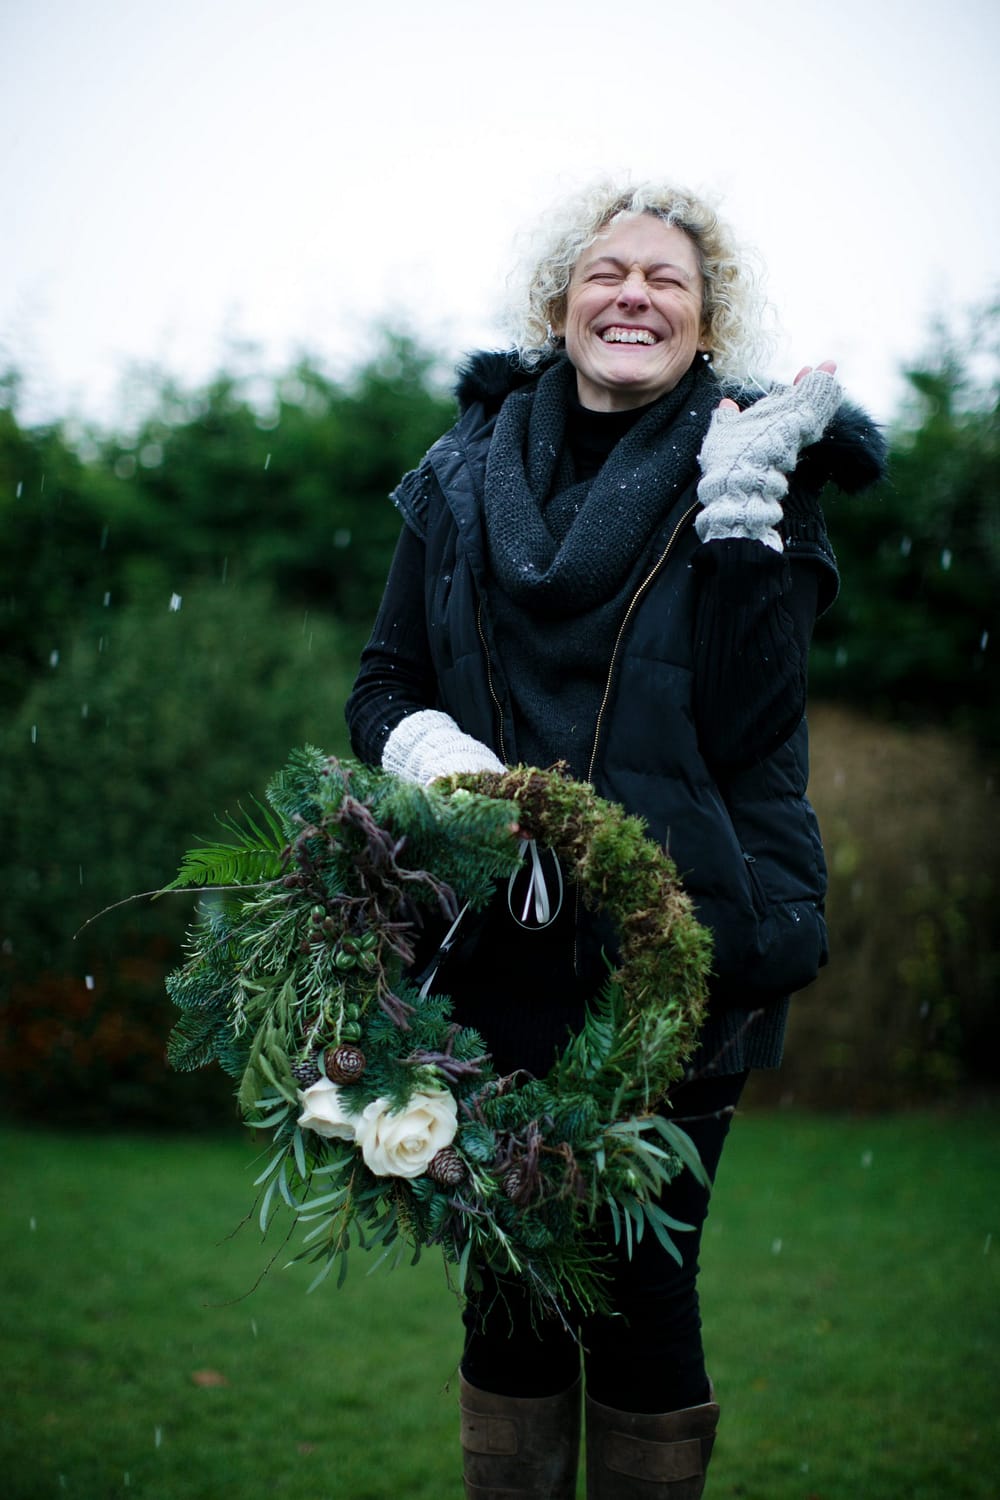 wild and co florist laughing with snow 